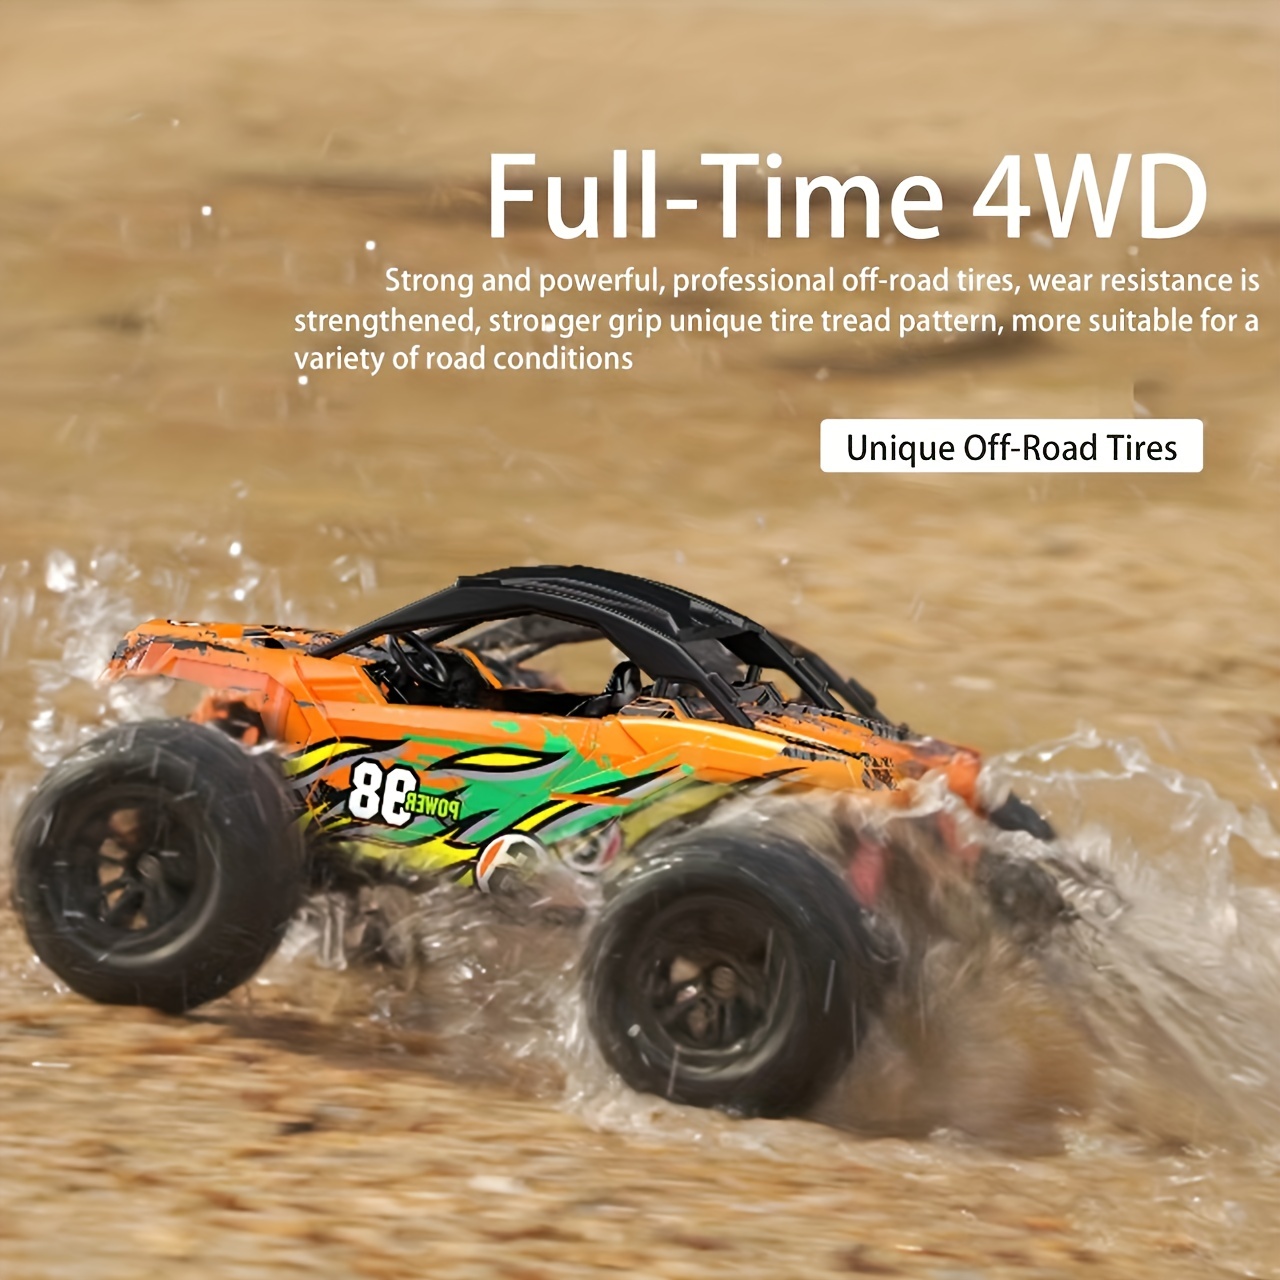 HAIBOXING Remote Controlled Car 4WD RC Car 1:16 36 km/h High Speed RC  Monster Truck 2.4 GHz Racing Car Waterproof Off-Road Vehicle Car Toy Gift  for